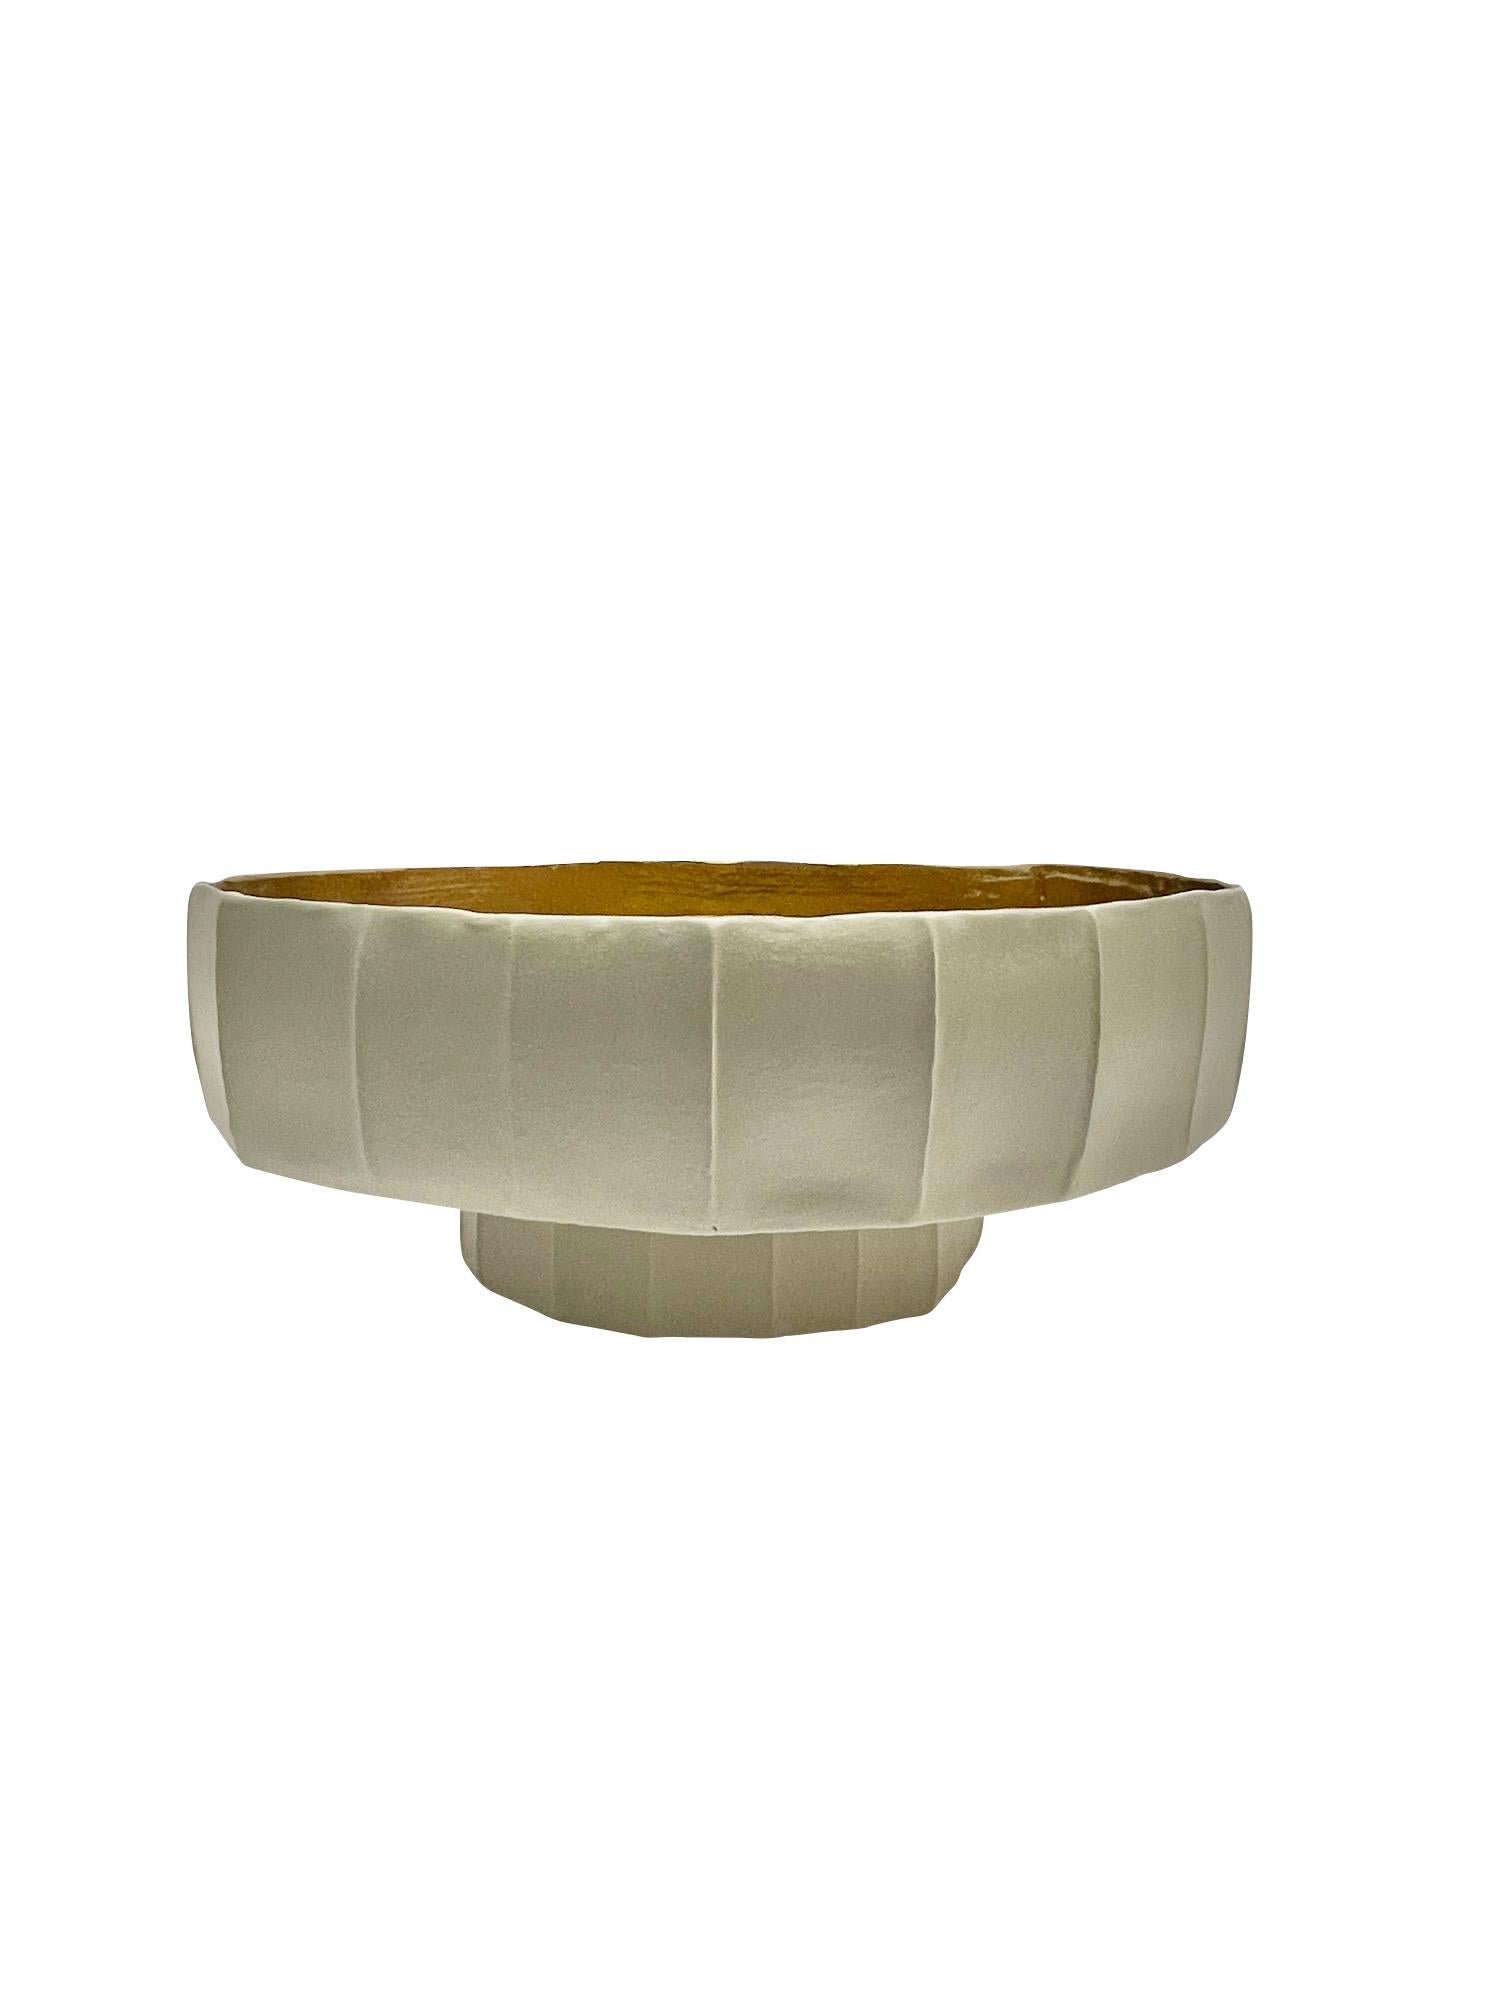 Italian white porcelain footed bowl with wide rib decorative design.
Smooth 22K gold interior.